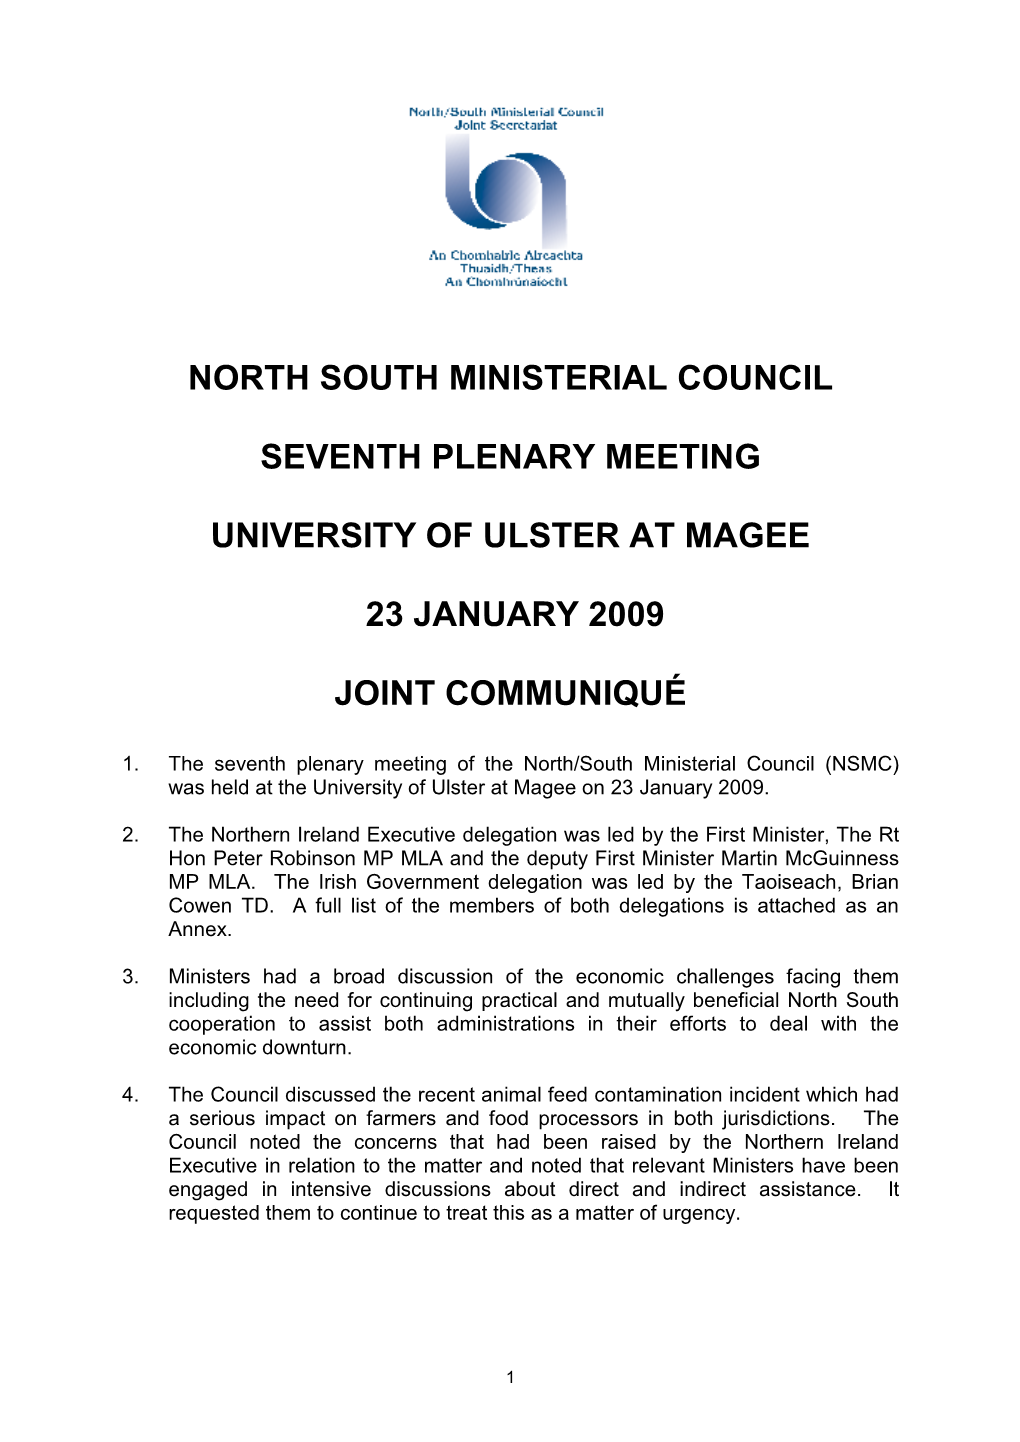 North South Ministerial Council Seventh Plenary Meeting University of Ulster at Magee 23 January 2009 Joint Communiqué